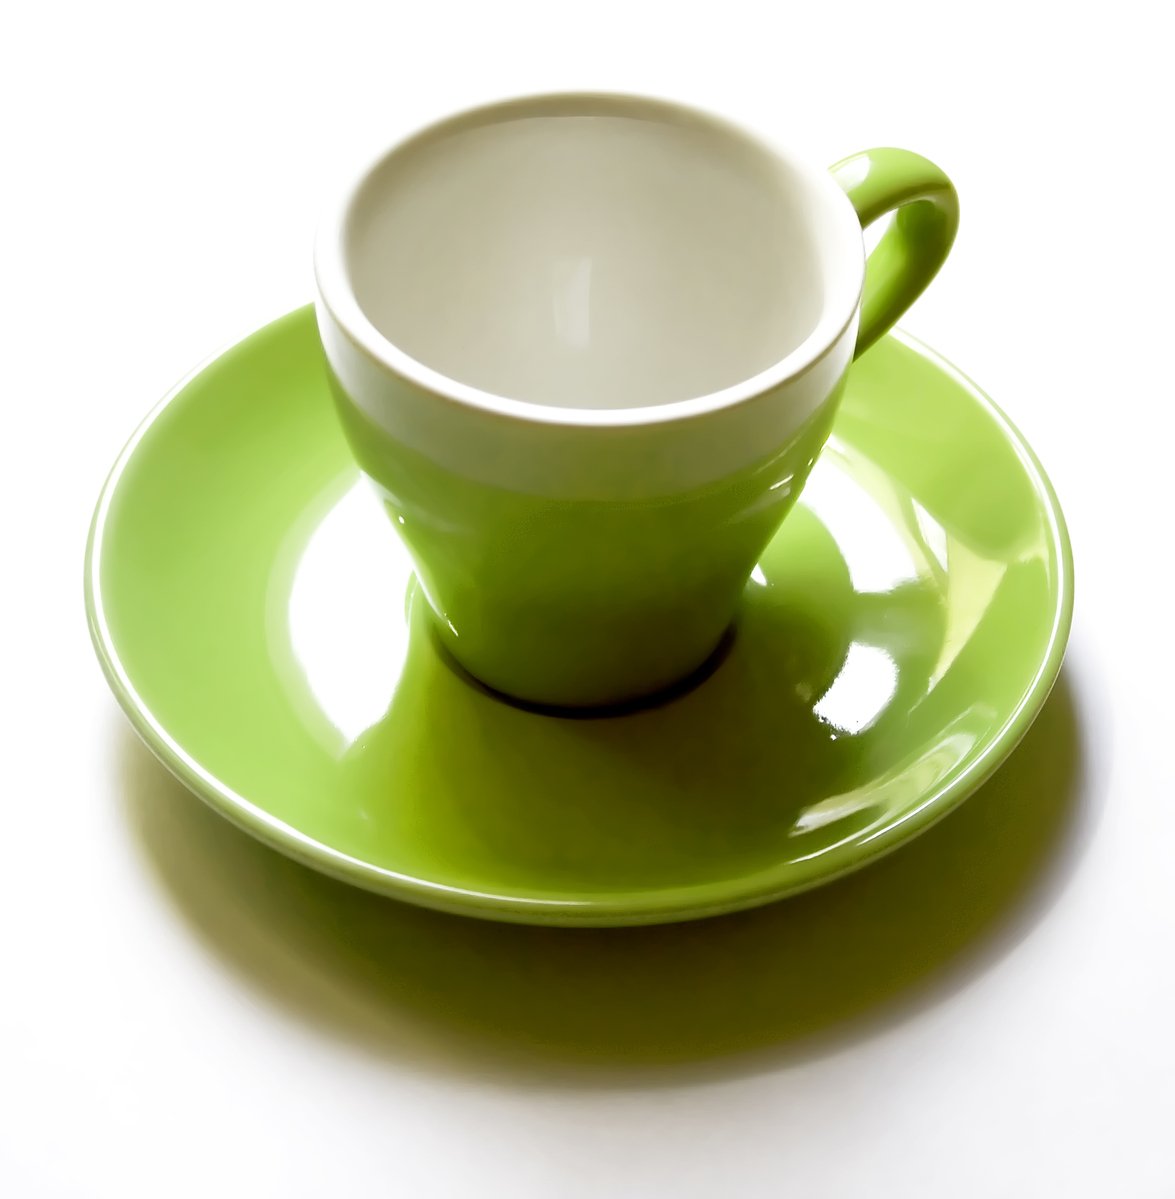 a green saucer with a bowl sitting on top of it